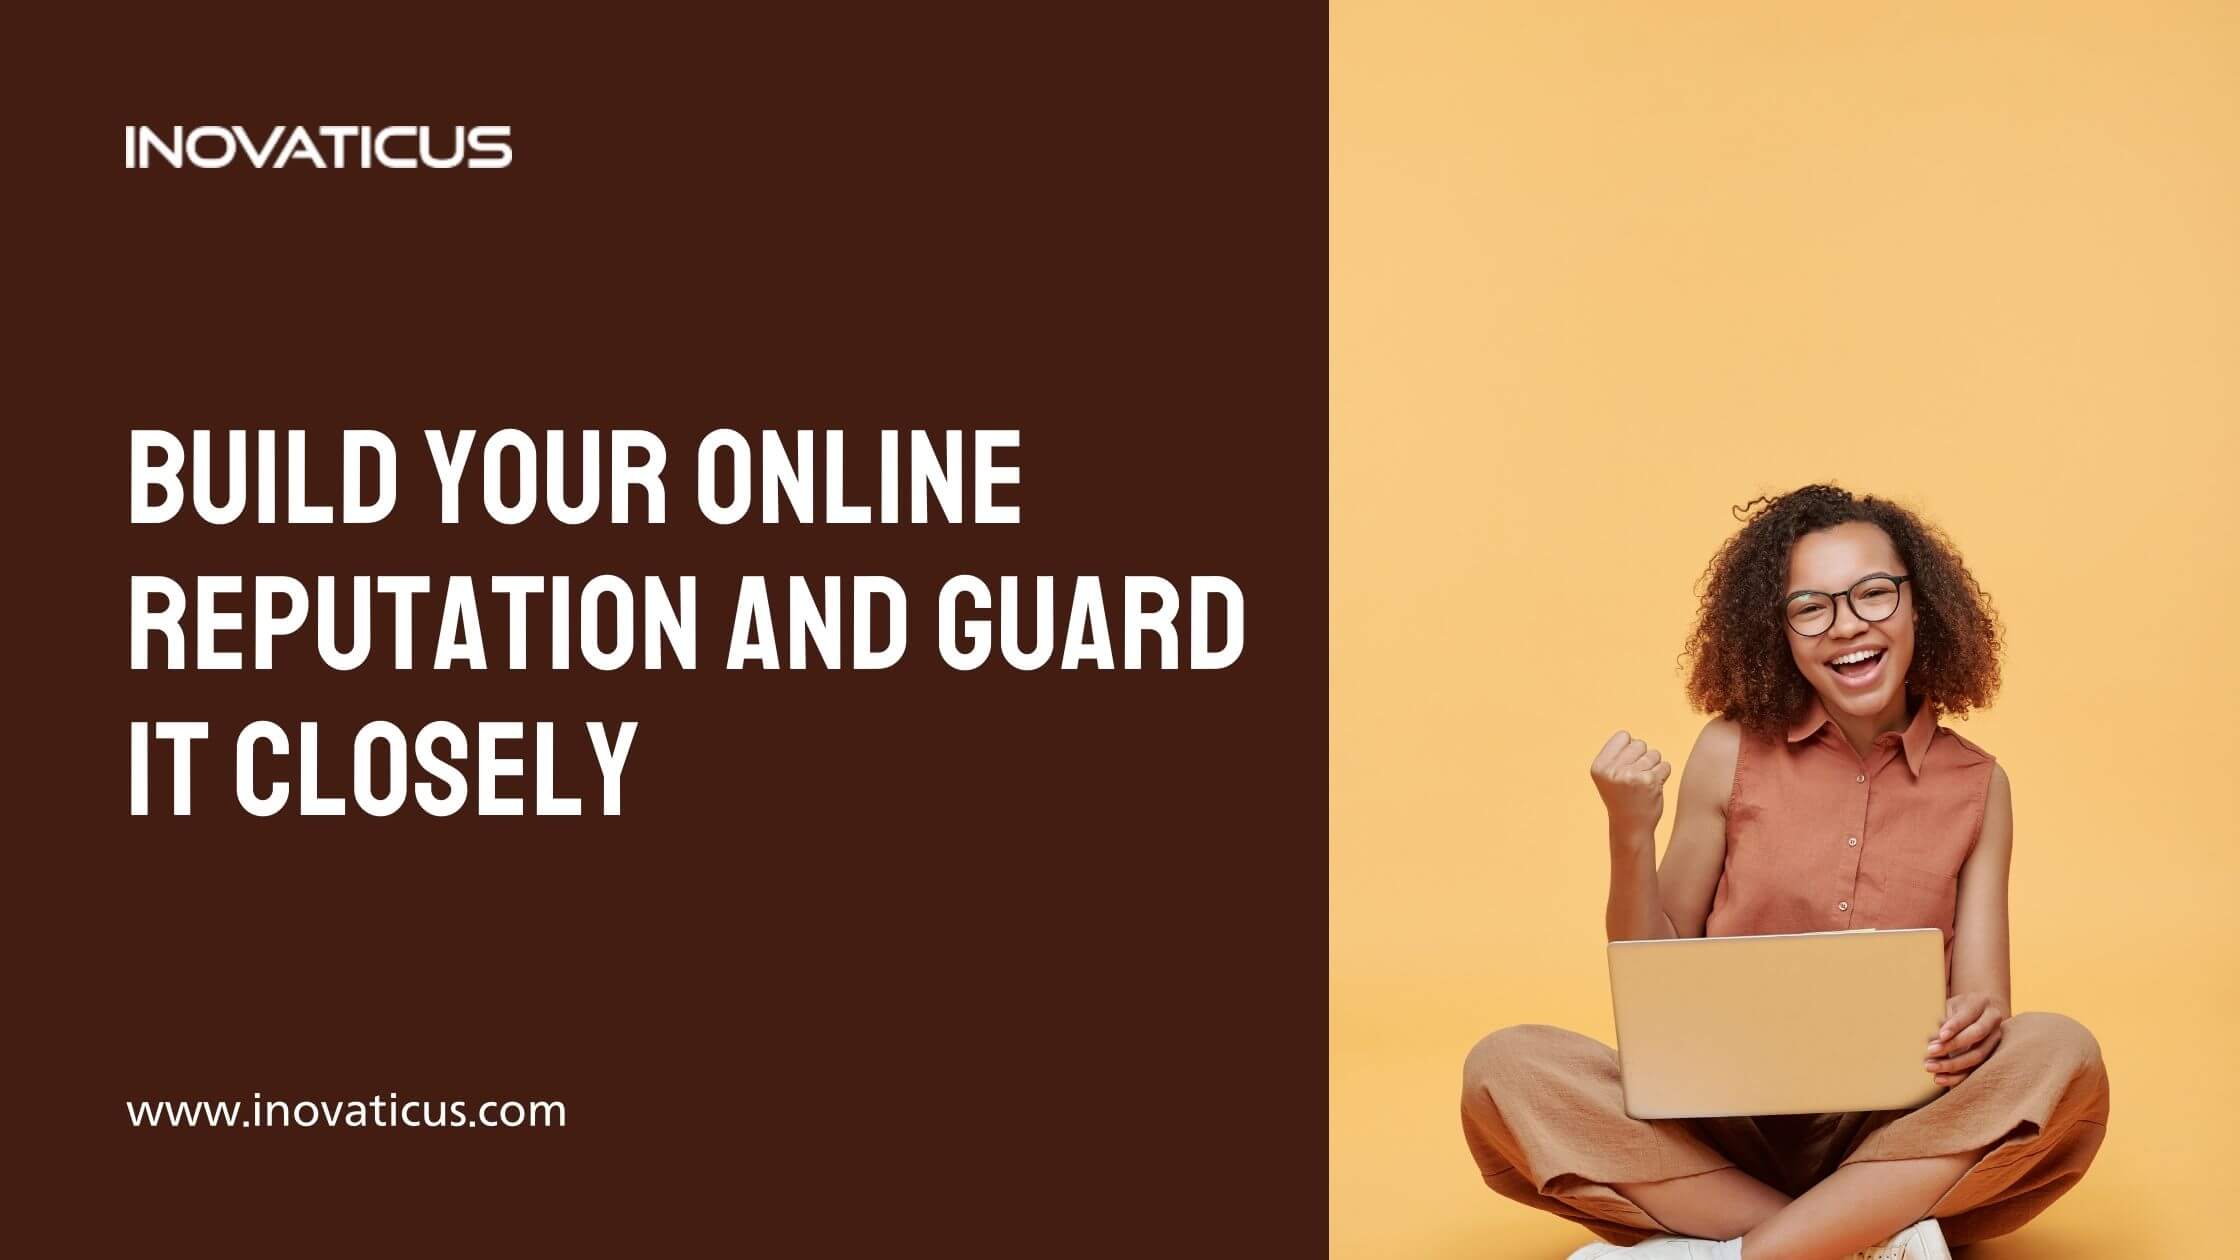 Build Your Online Reputation And Guard It Closely